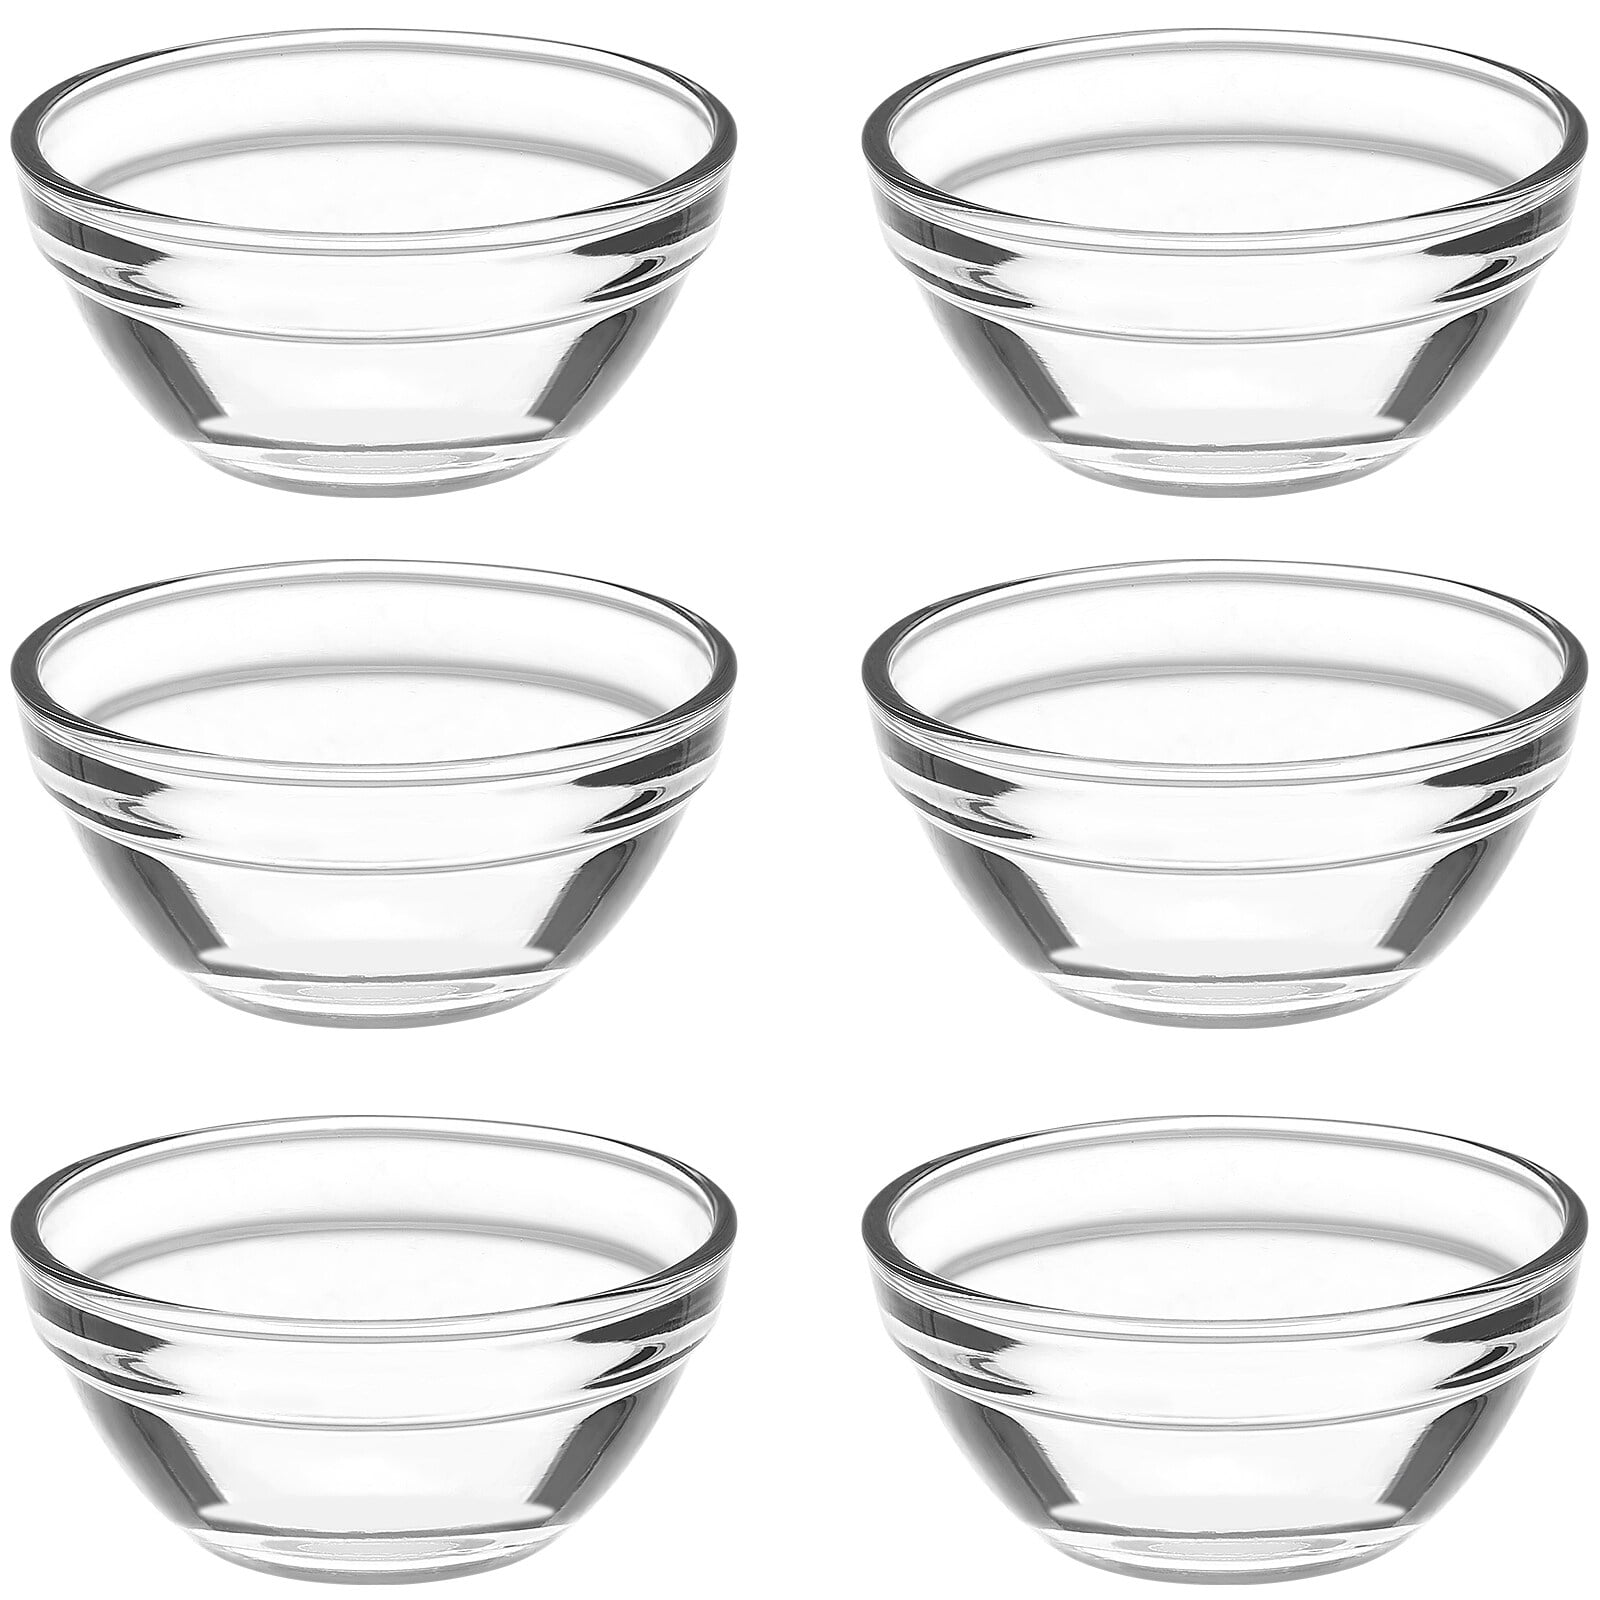  yarlung 9 Pack Small Glass Bowls with Plastic Lids, 6.8 Oz  Clear Pudding Cups Fruits Dish Glass Containers for Salad, Sauces, Cereal,  Dessert, Snacks, Refrigerator, Freezer Food Storage: Home & Kitchen